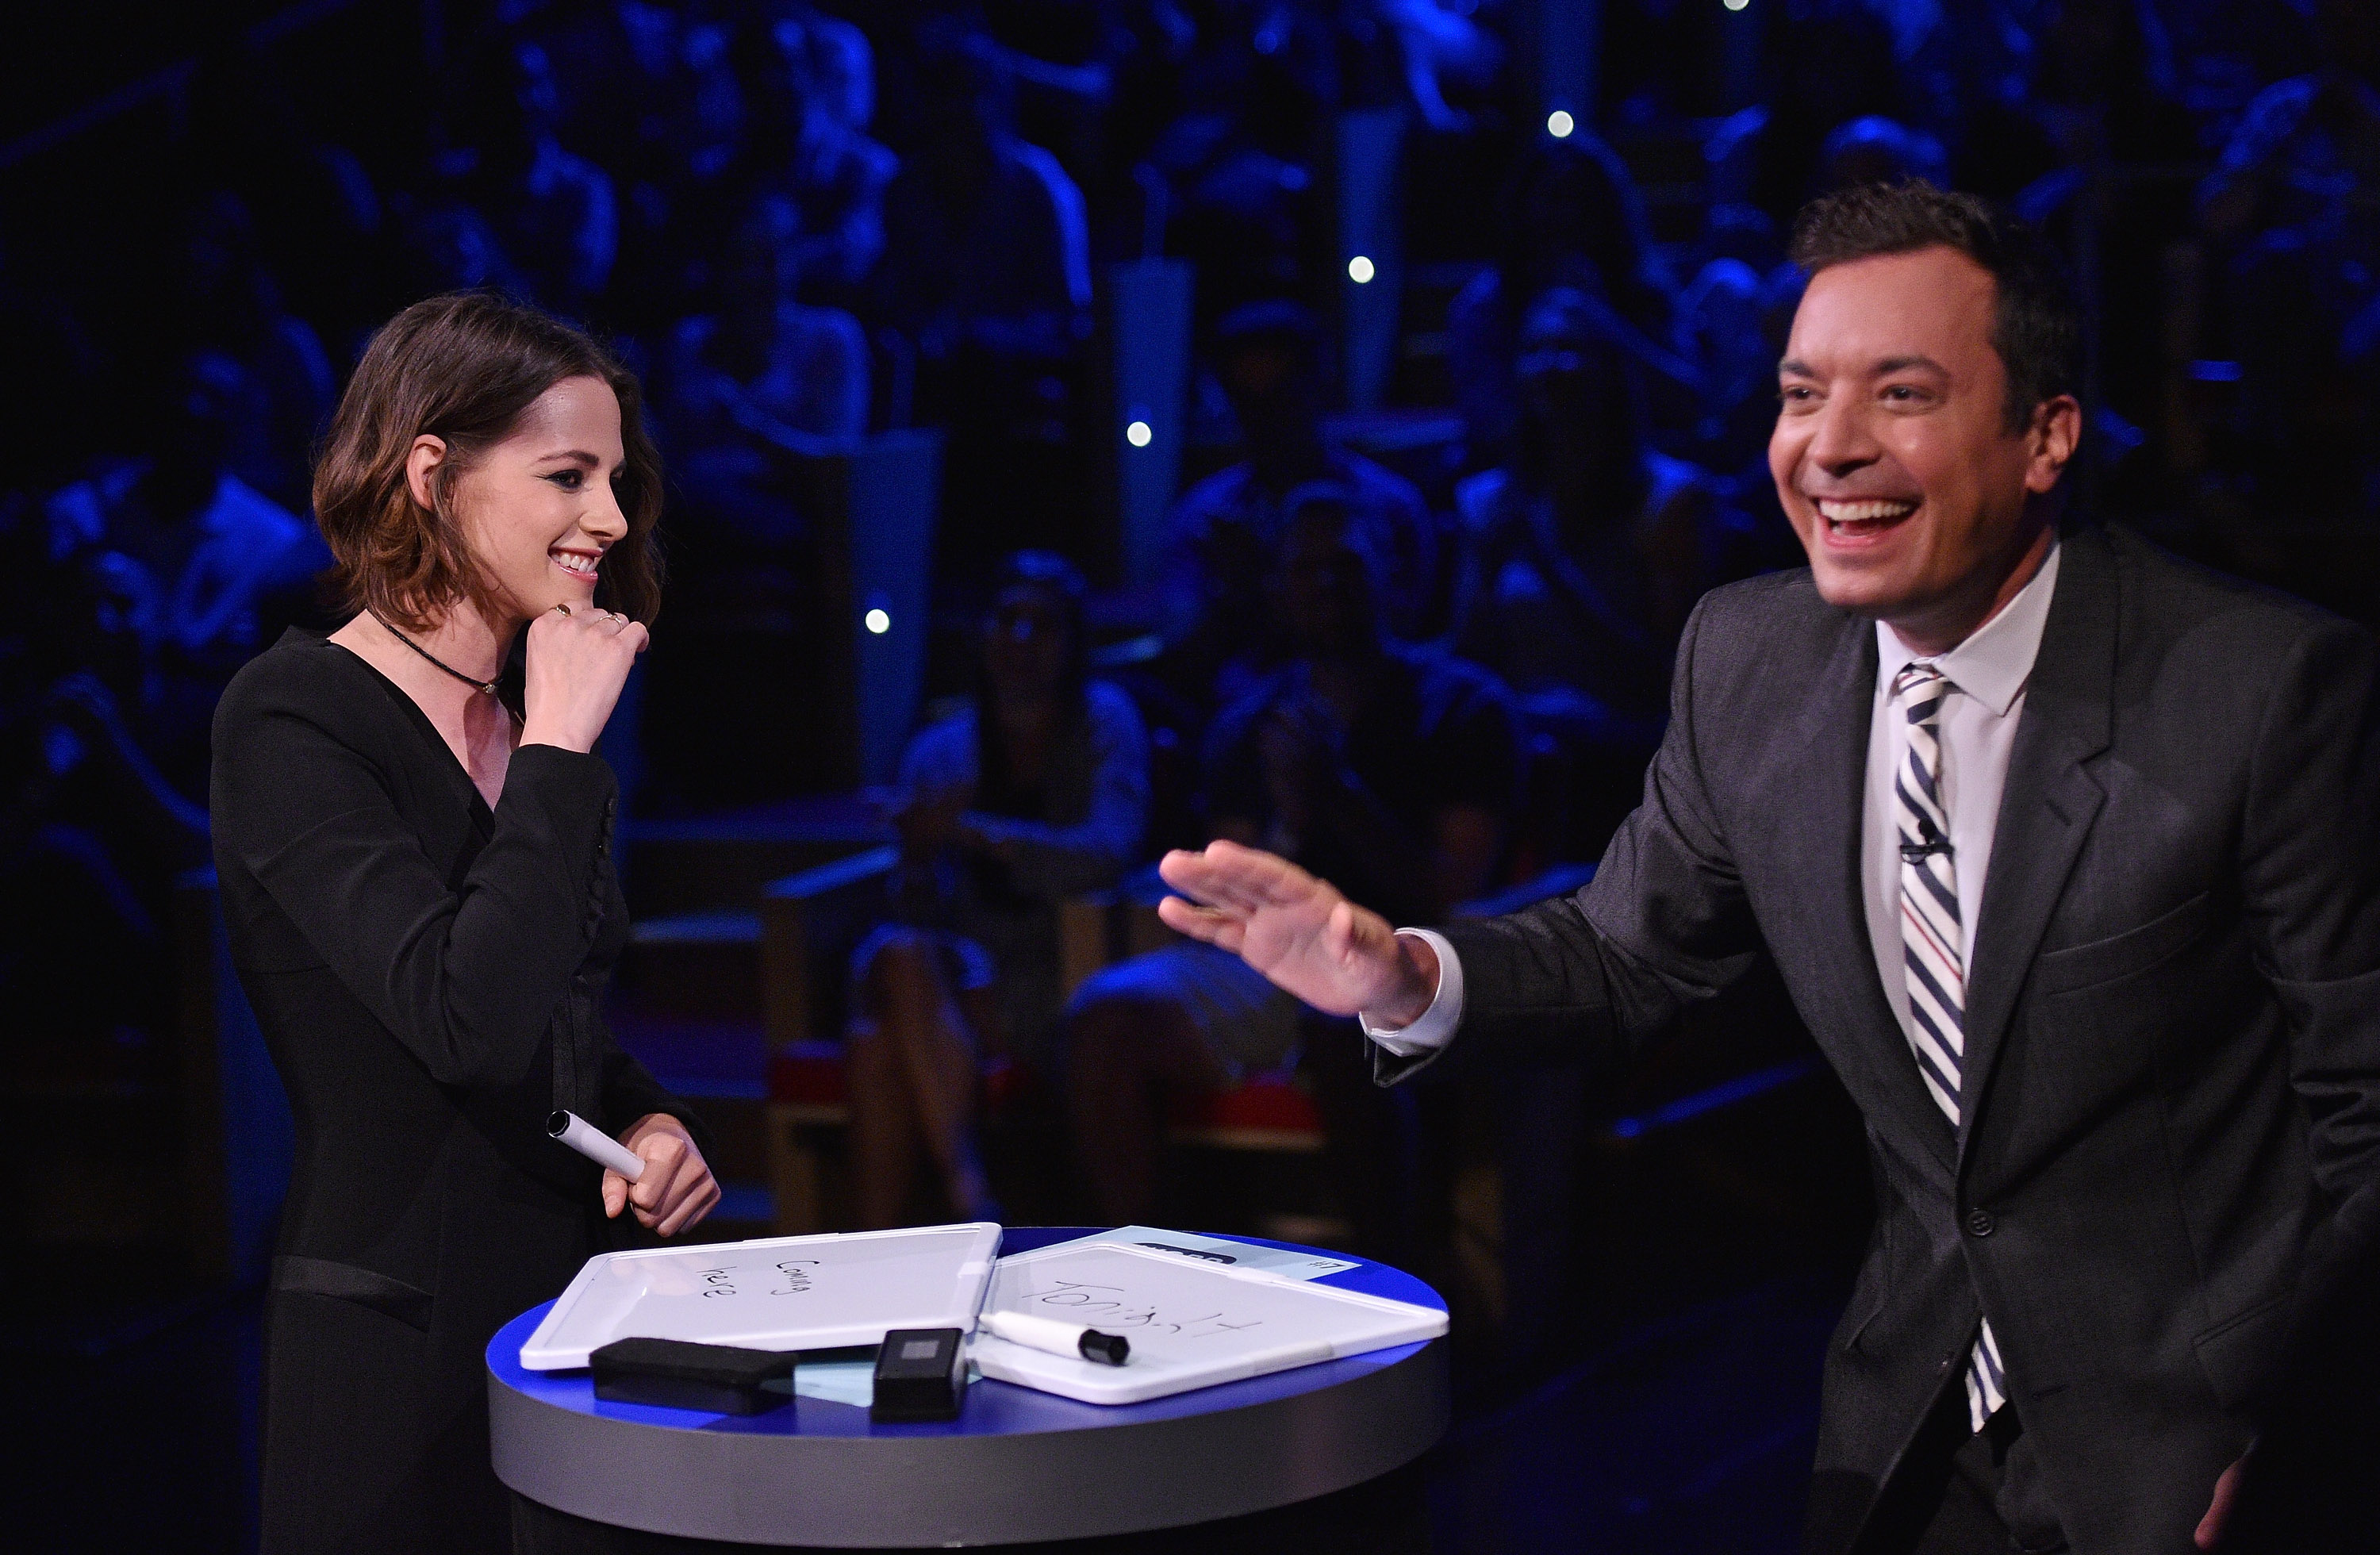 Actress Kristen Stewart and Jimmy Fallon play a game on "The Tonight Show Starring Jimmy Fallon"  in New York City in August 11, 2015 (Mike Coppola—NBC)